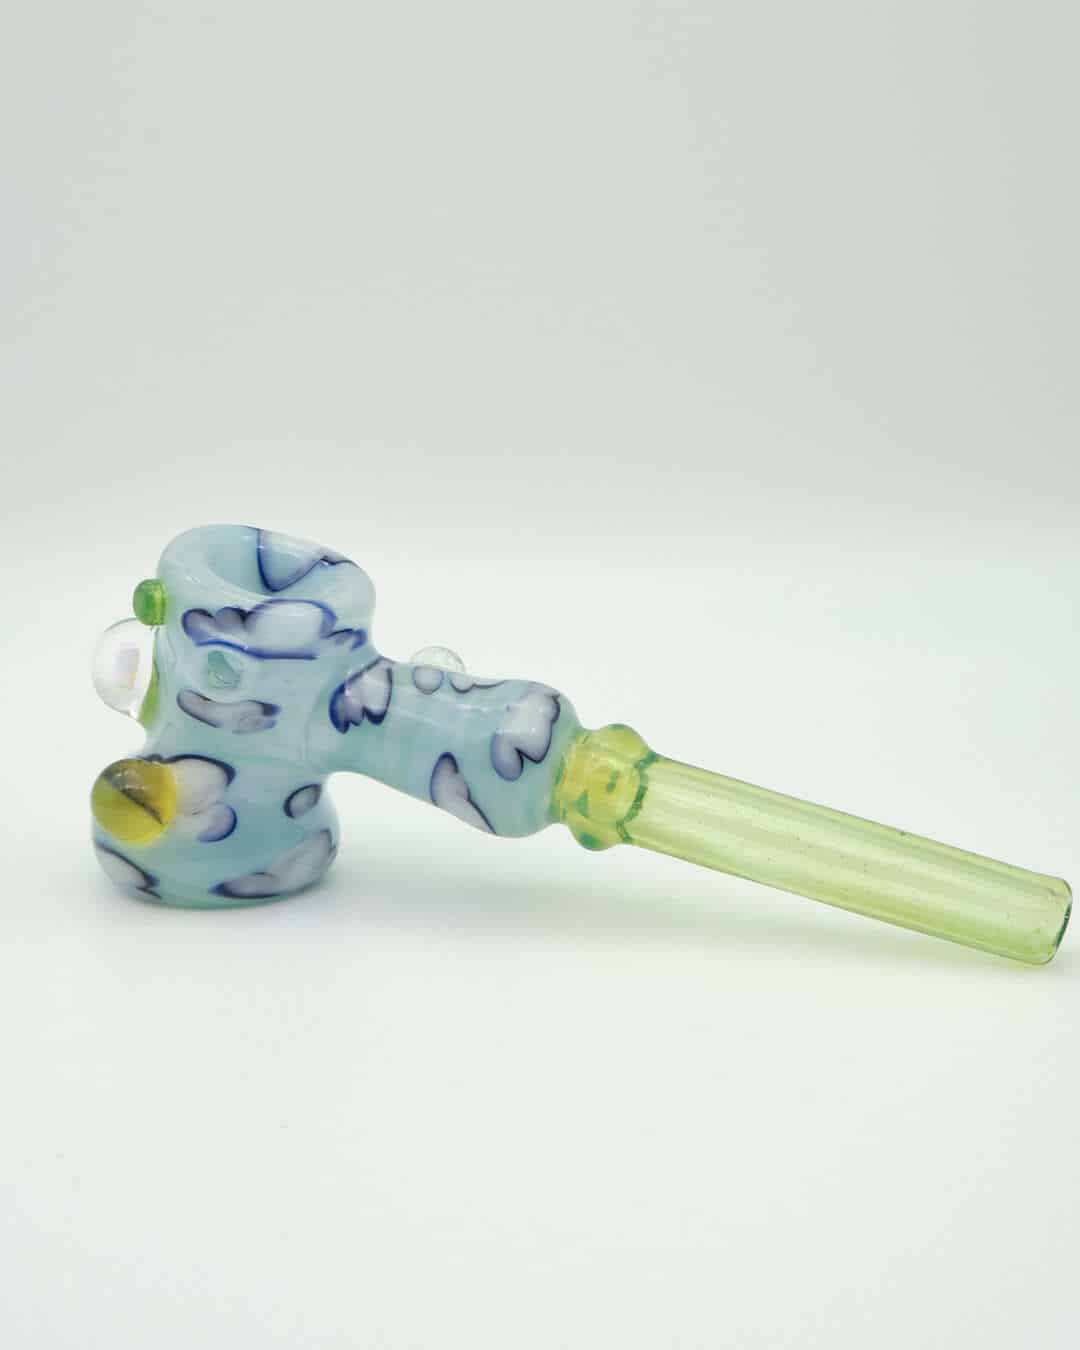 meticulously crafted design of the Hammer Pipe by Gnarla Carla